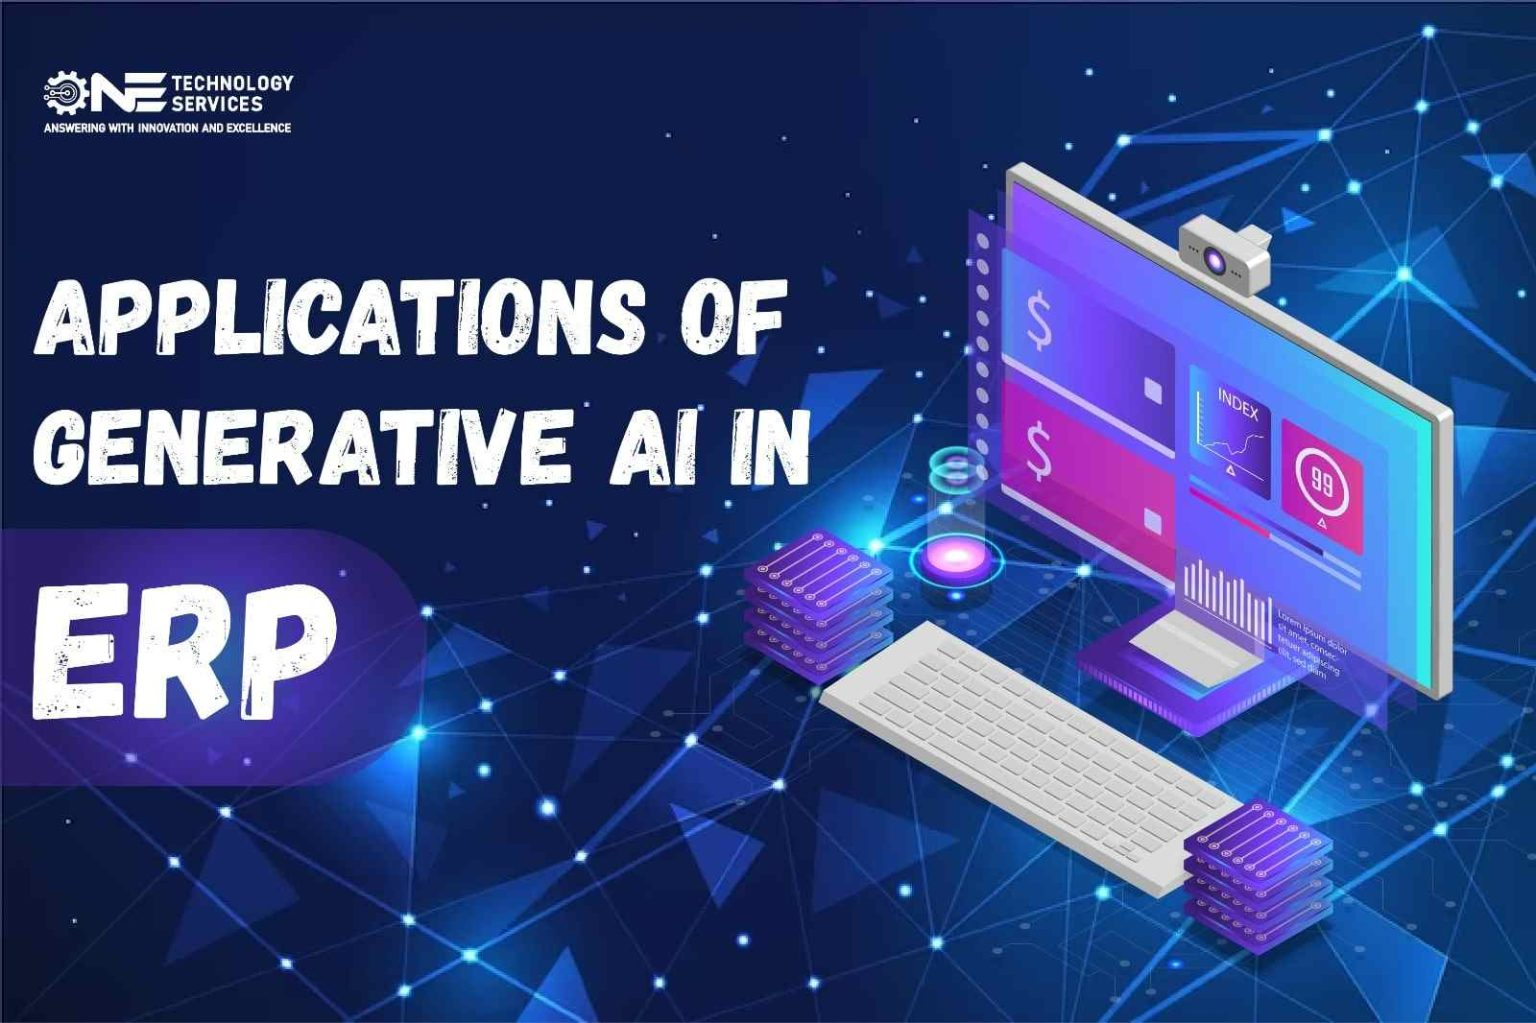 Applications of Generative AI in ERP